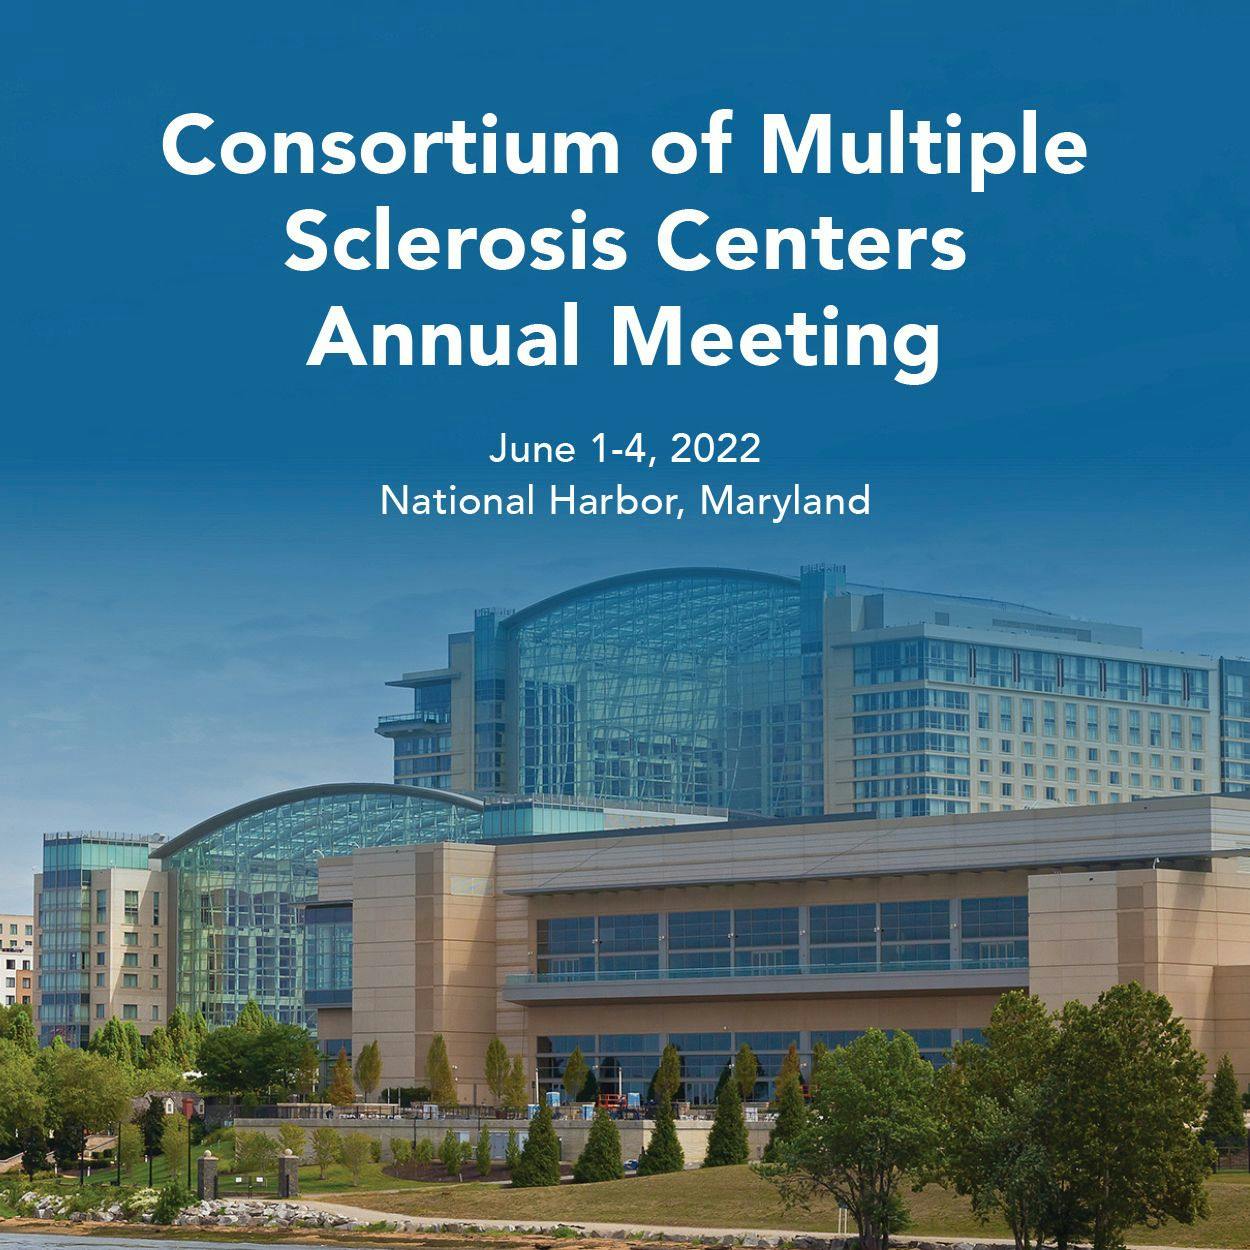 CMSC 2022: What to Expect From the Annual Meeting